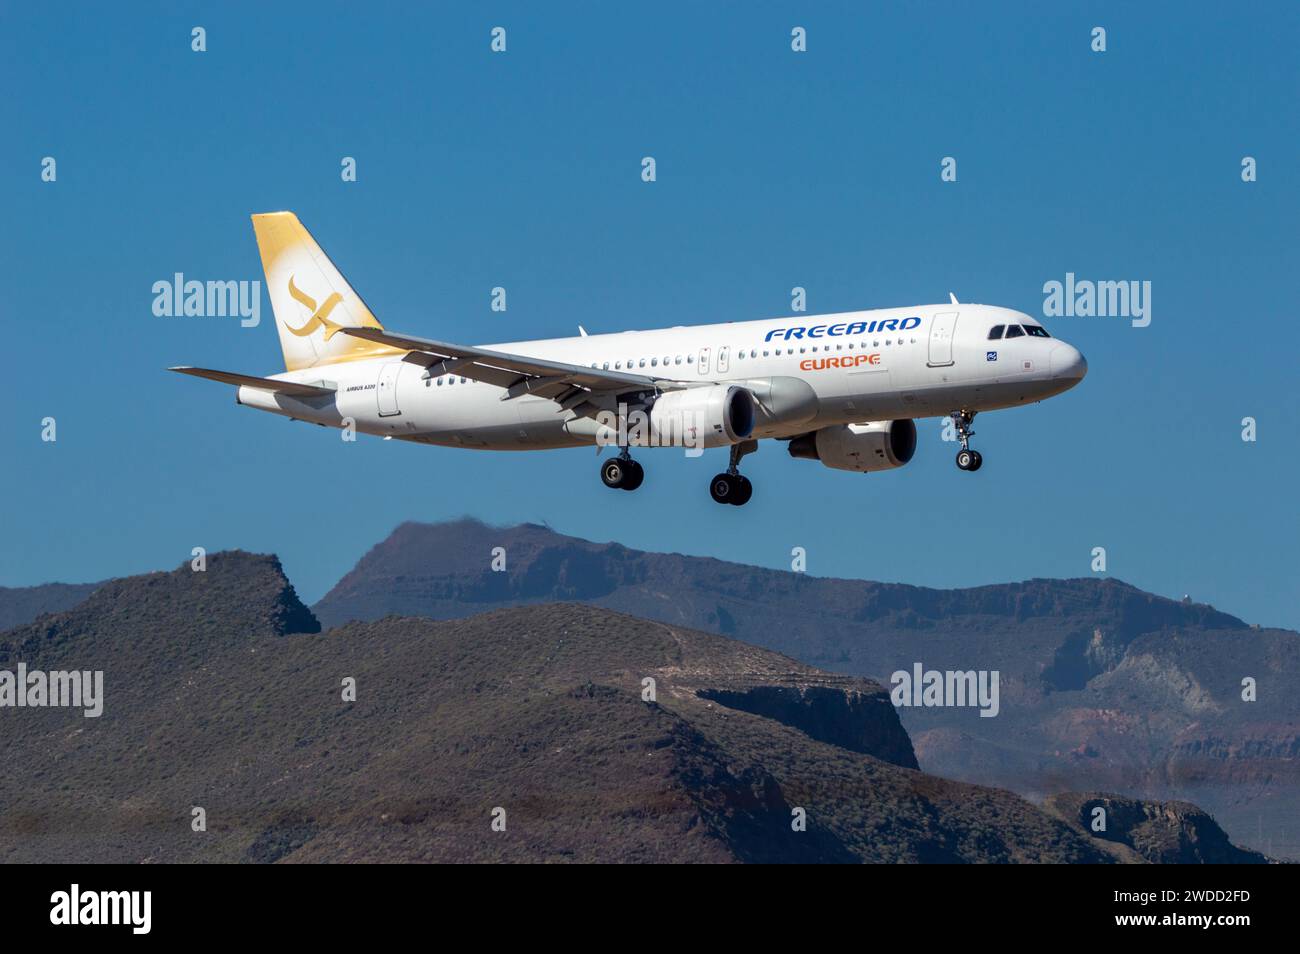 Airbus A320 airliner of the airline Freebird Airlines Europe Stock Photo